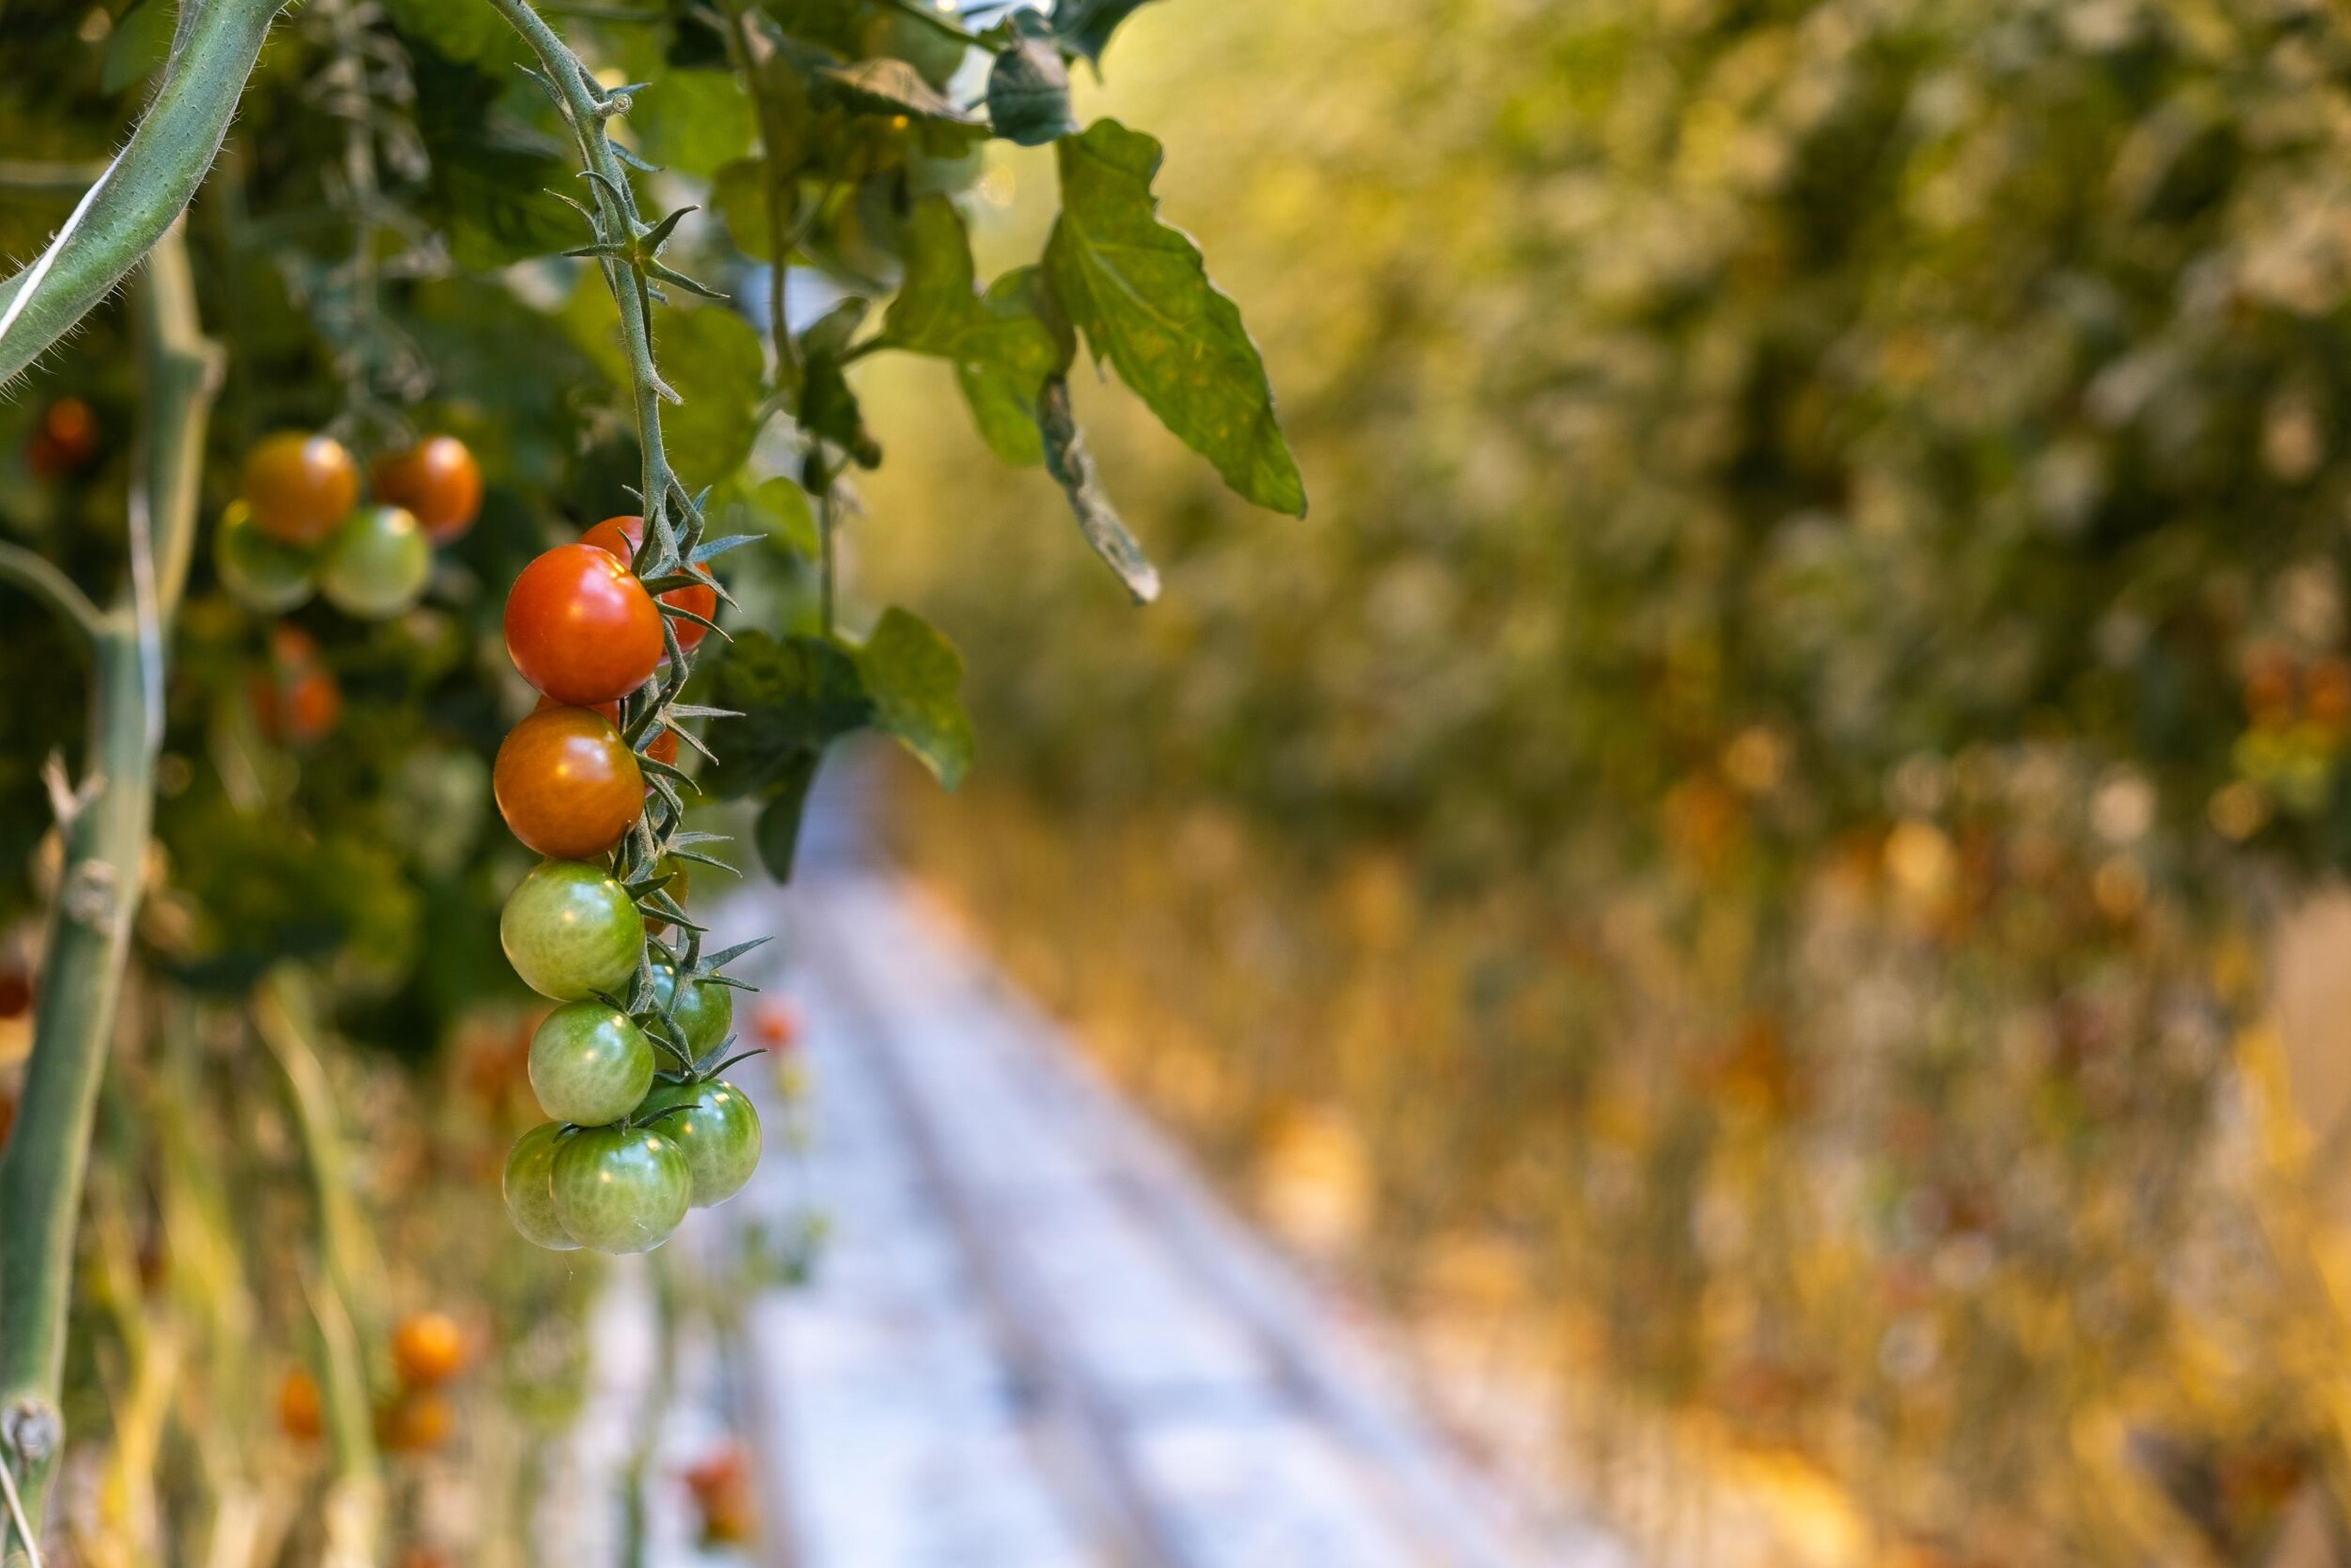 Tomato plant with green and red tomatoes inside a greenhouse in Iceland.